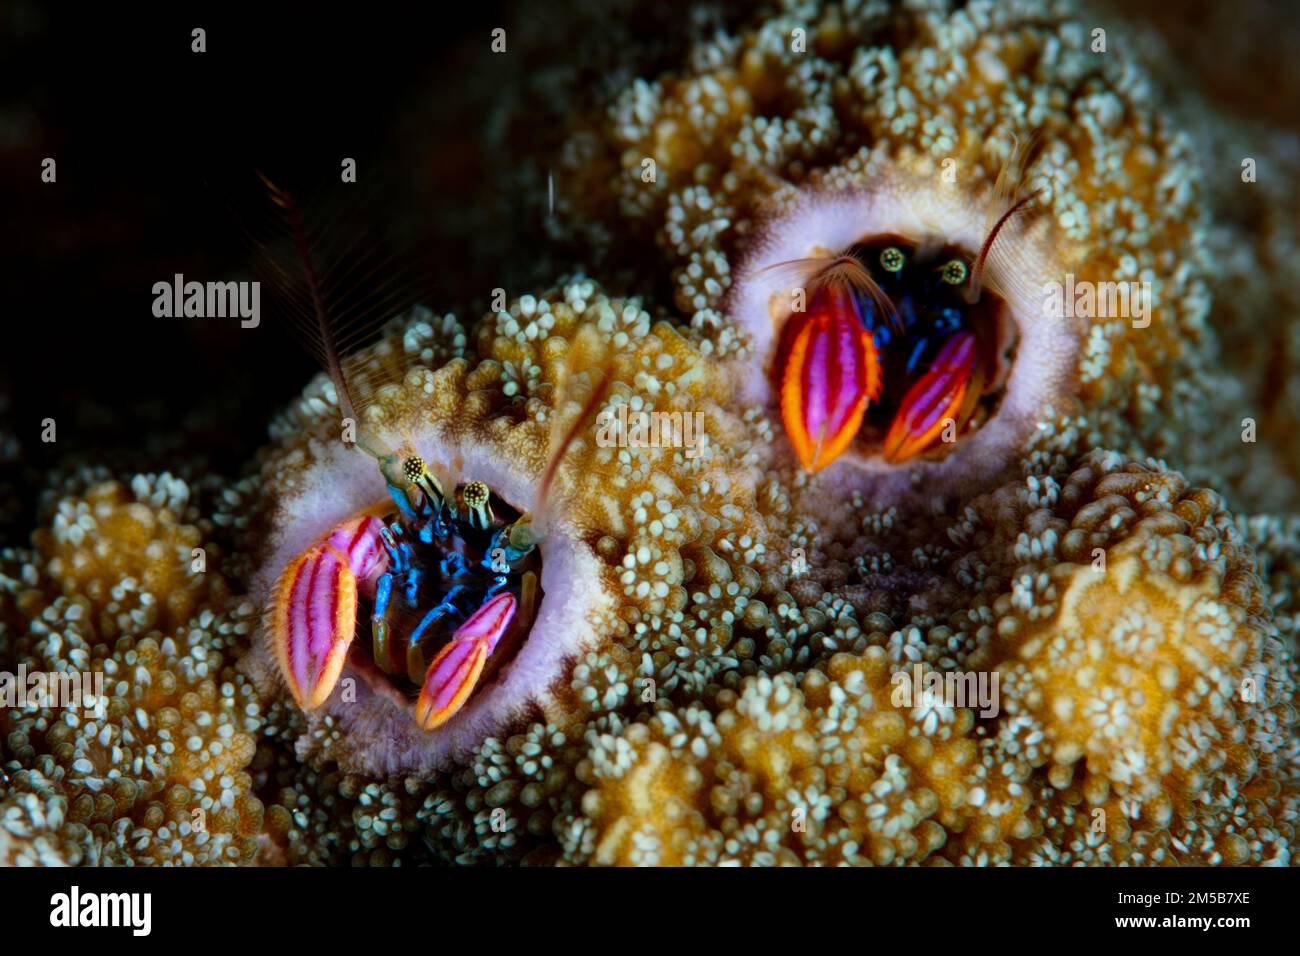 Coral residing hermit crabs, Paguritta sp., poke their colorful claws and eyes out of its protective tube. These tiny hermit crabs feed on plankton. Stock Photo